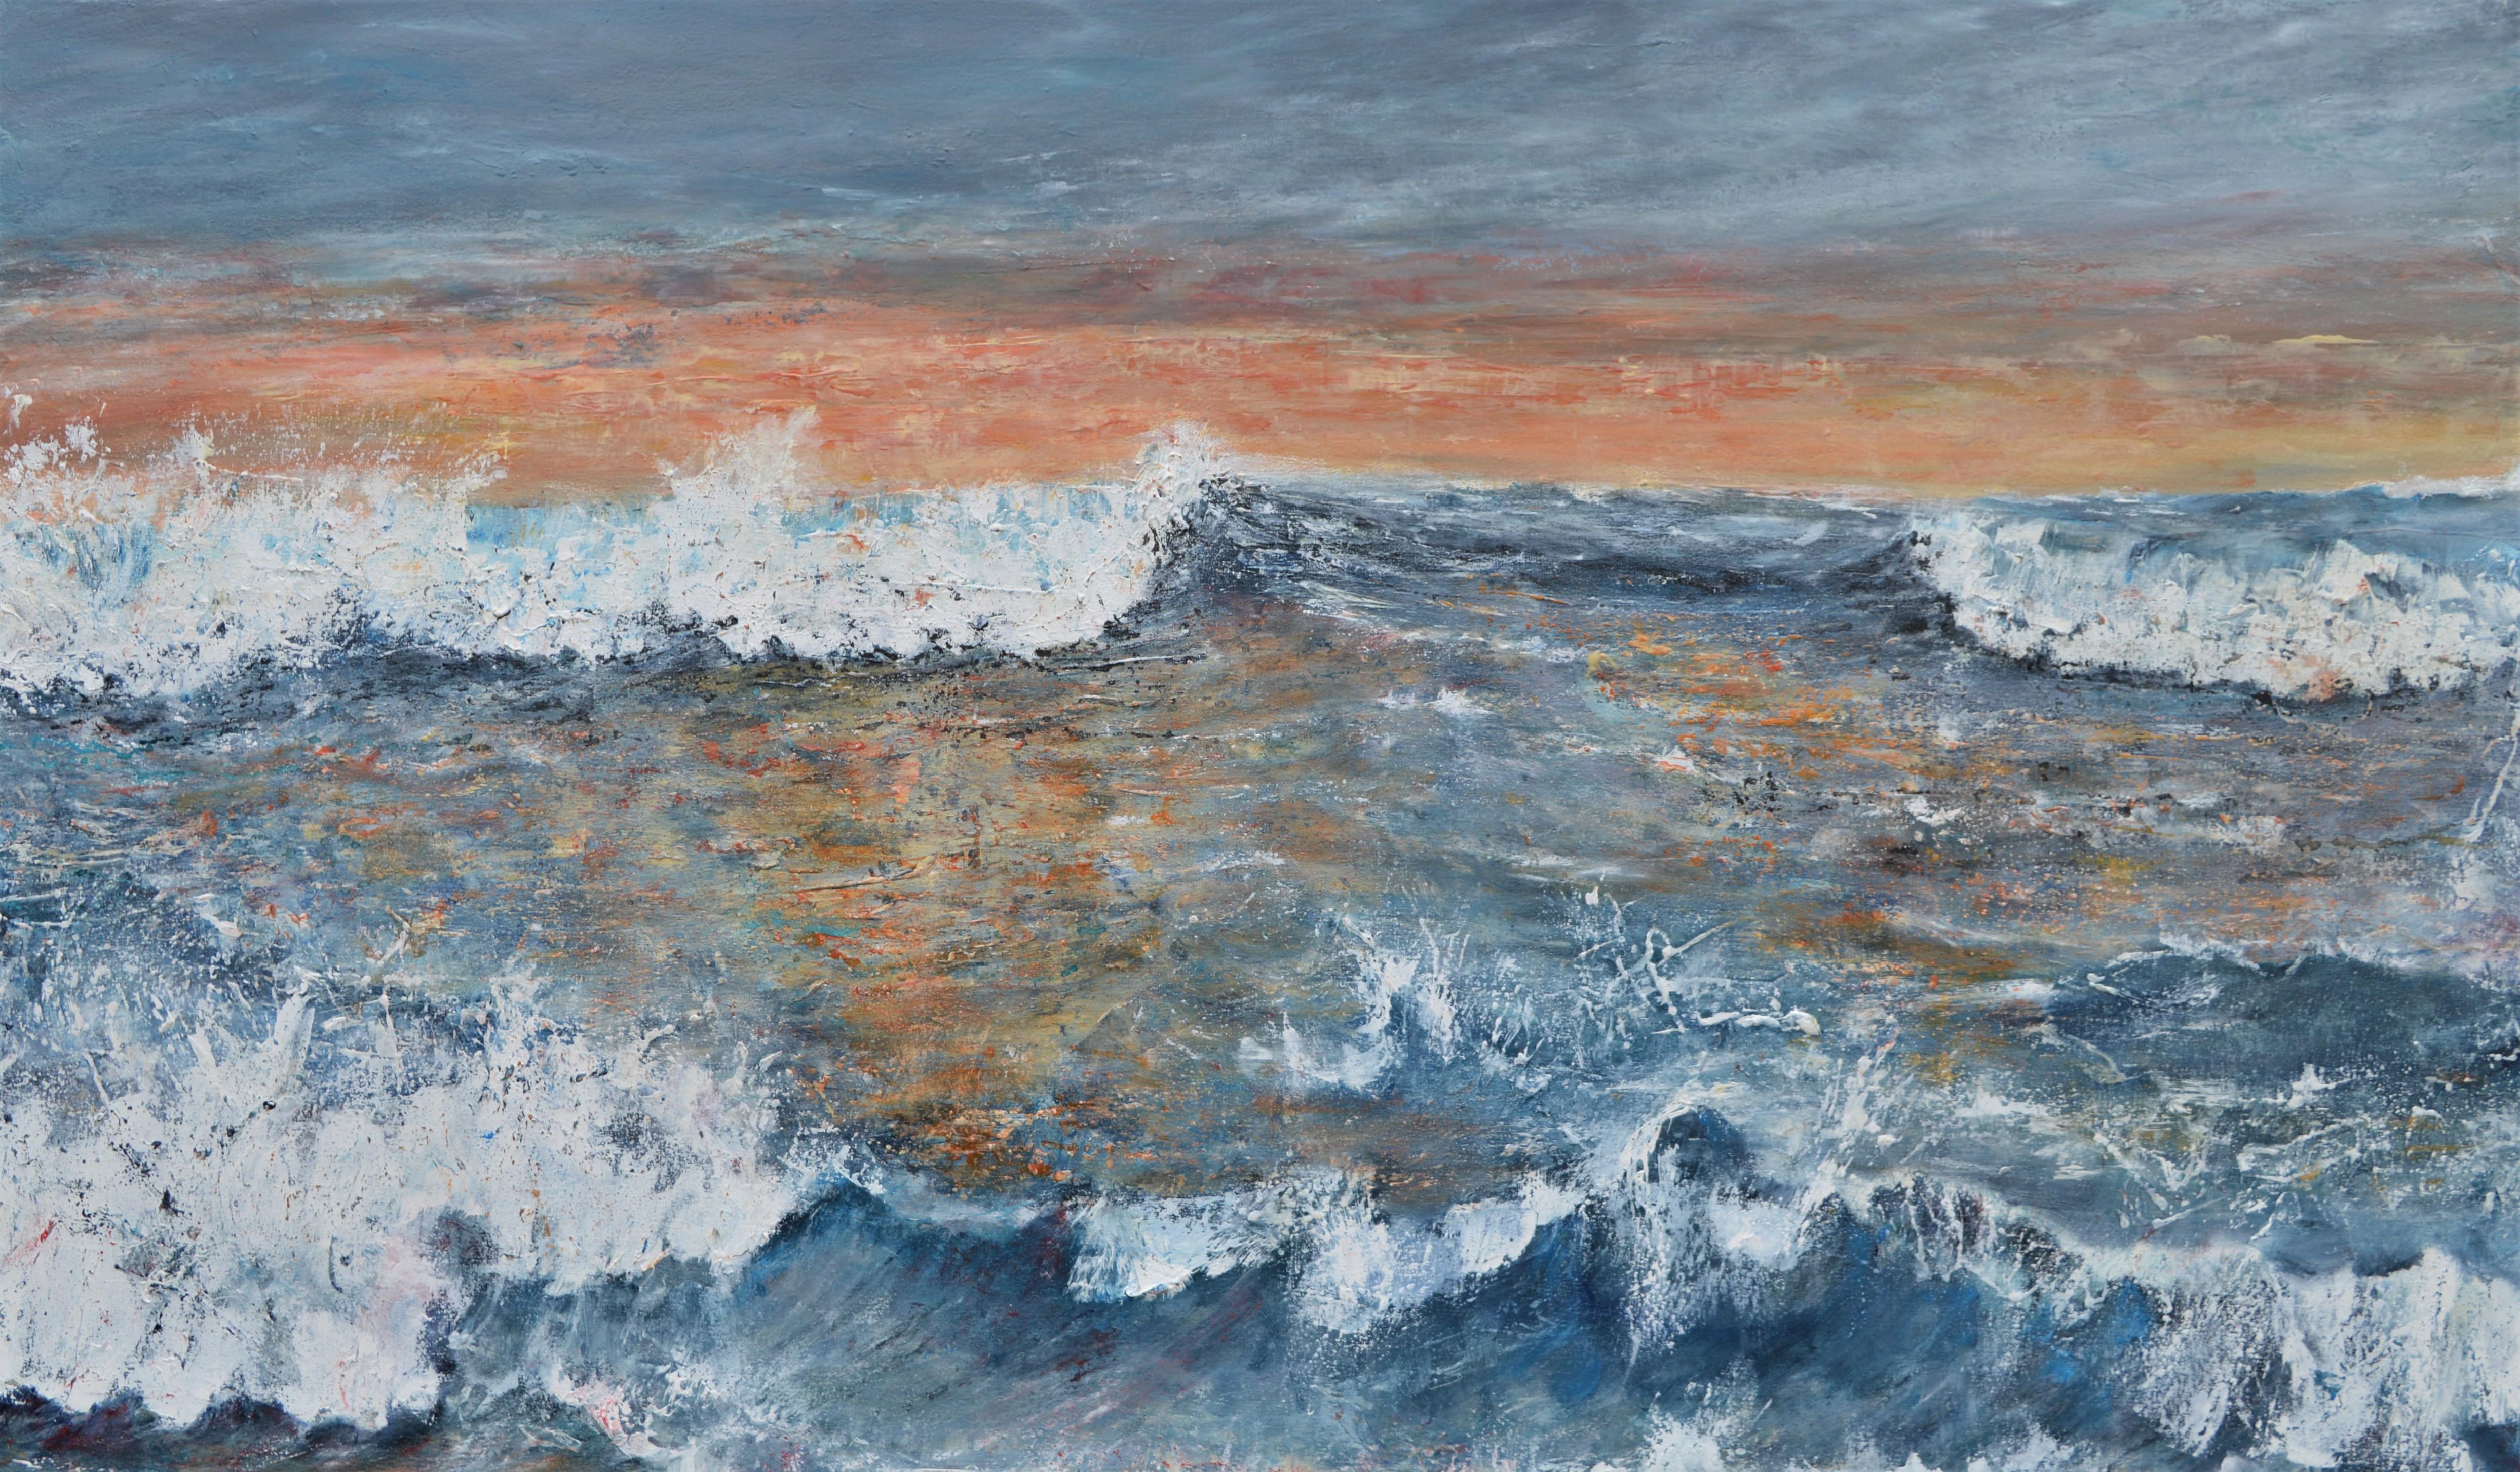 "Western Promise: A Good Day Beckons".  Large Contemporary Seascape Oil Painting